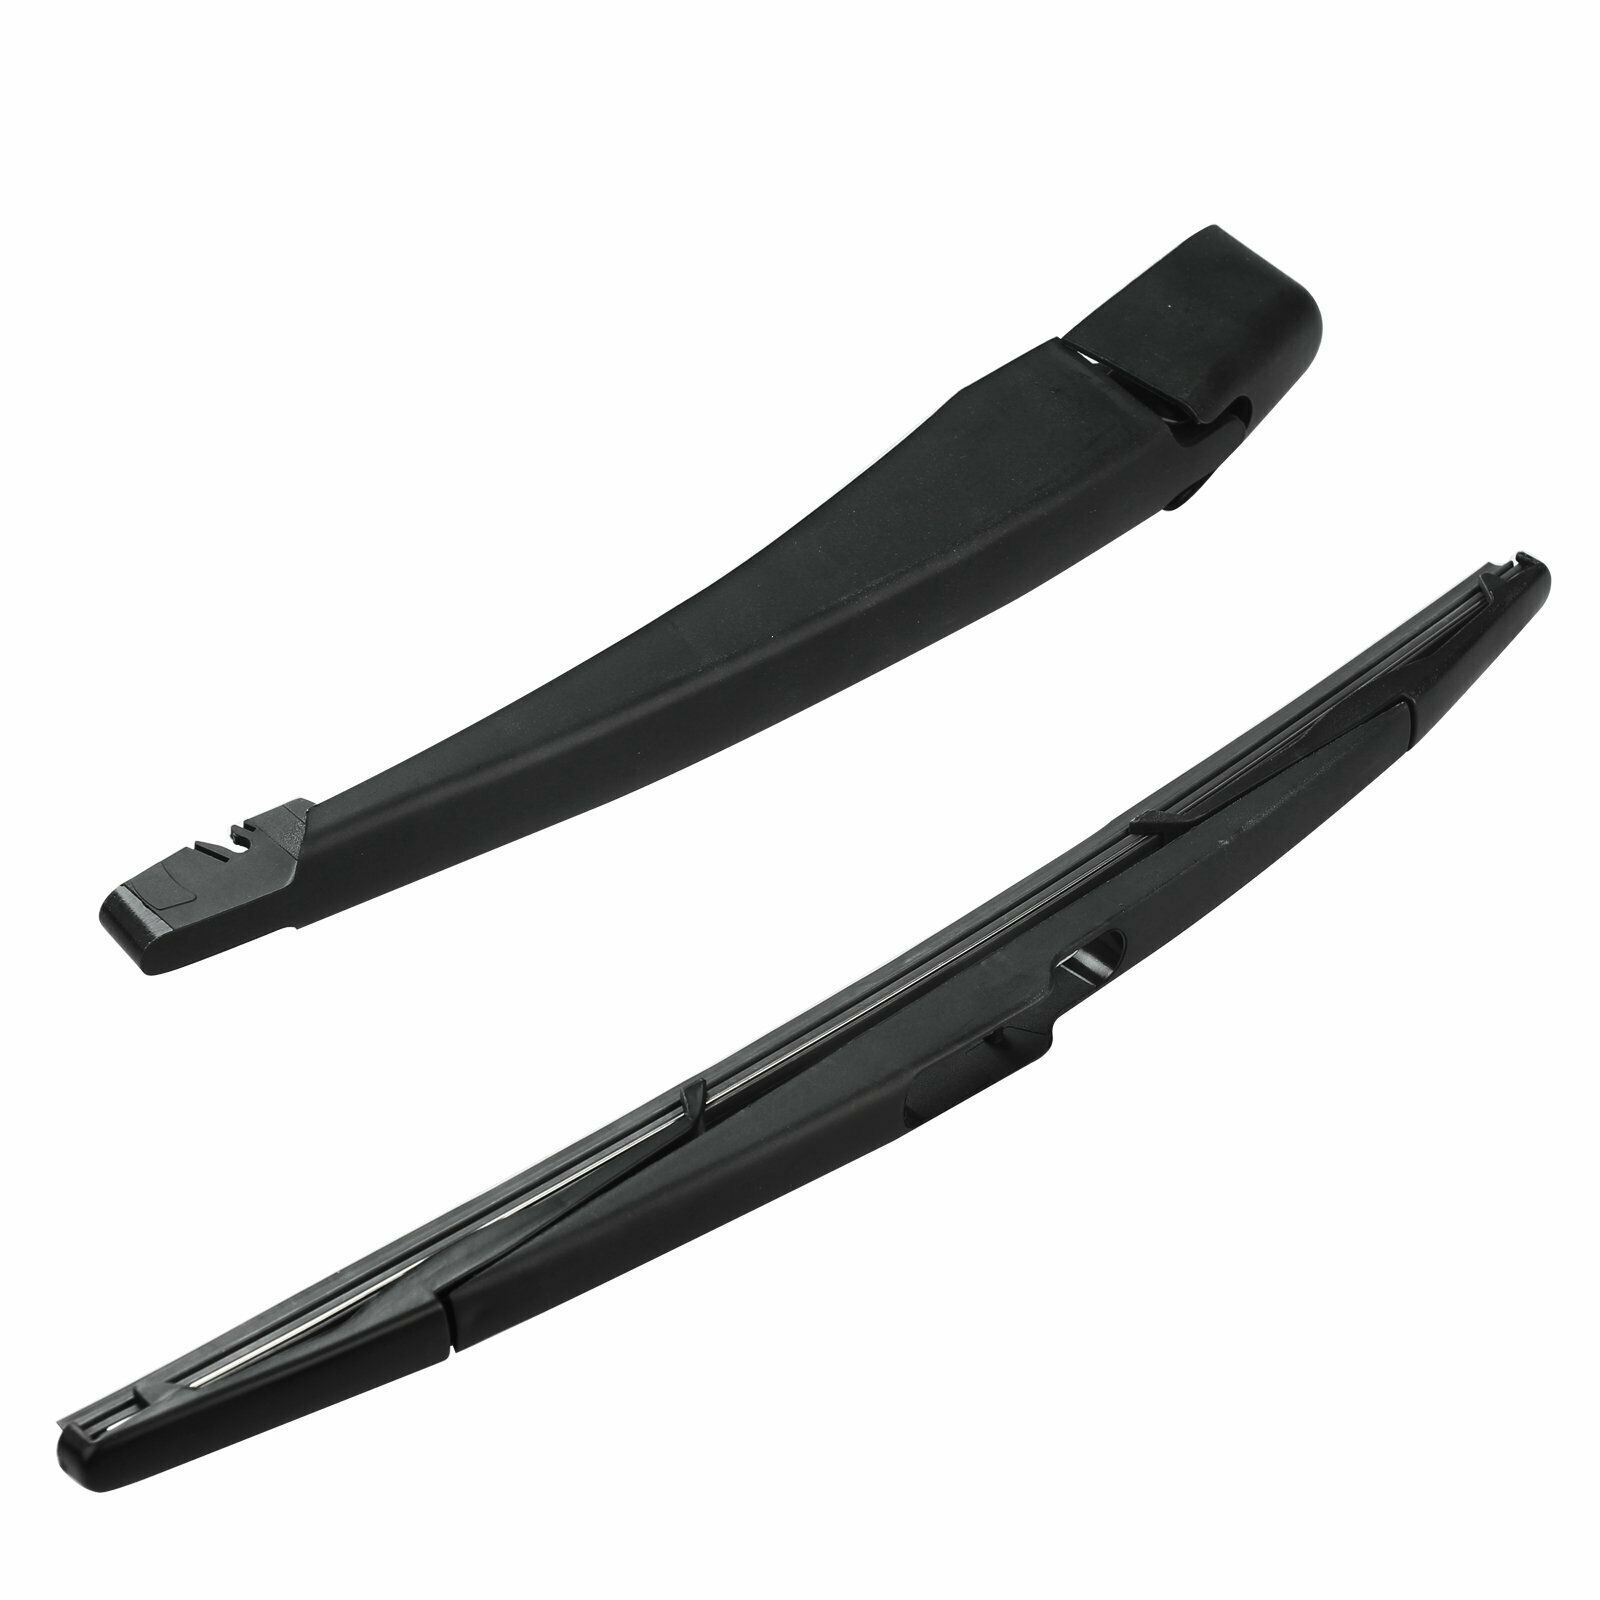 Rear Wiper Arm + Blade Set Fits Dodge Caravan Chrysler Town & Country 2008-2009 - Windshield 2009 Chrysler Town And Country Windshield Wipers